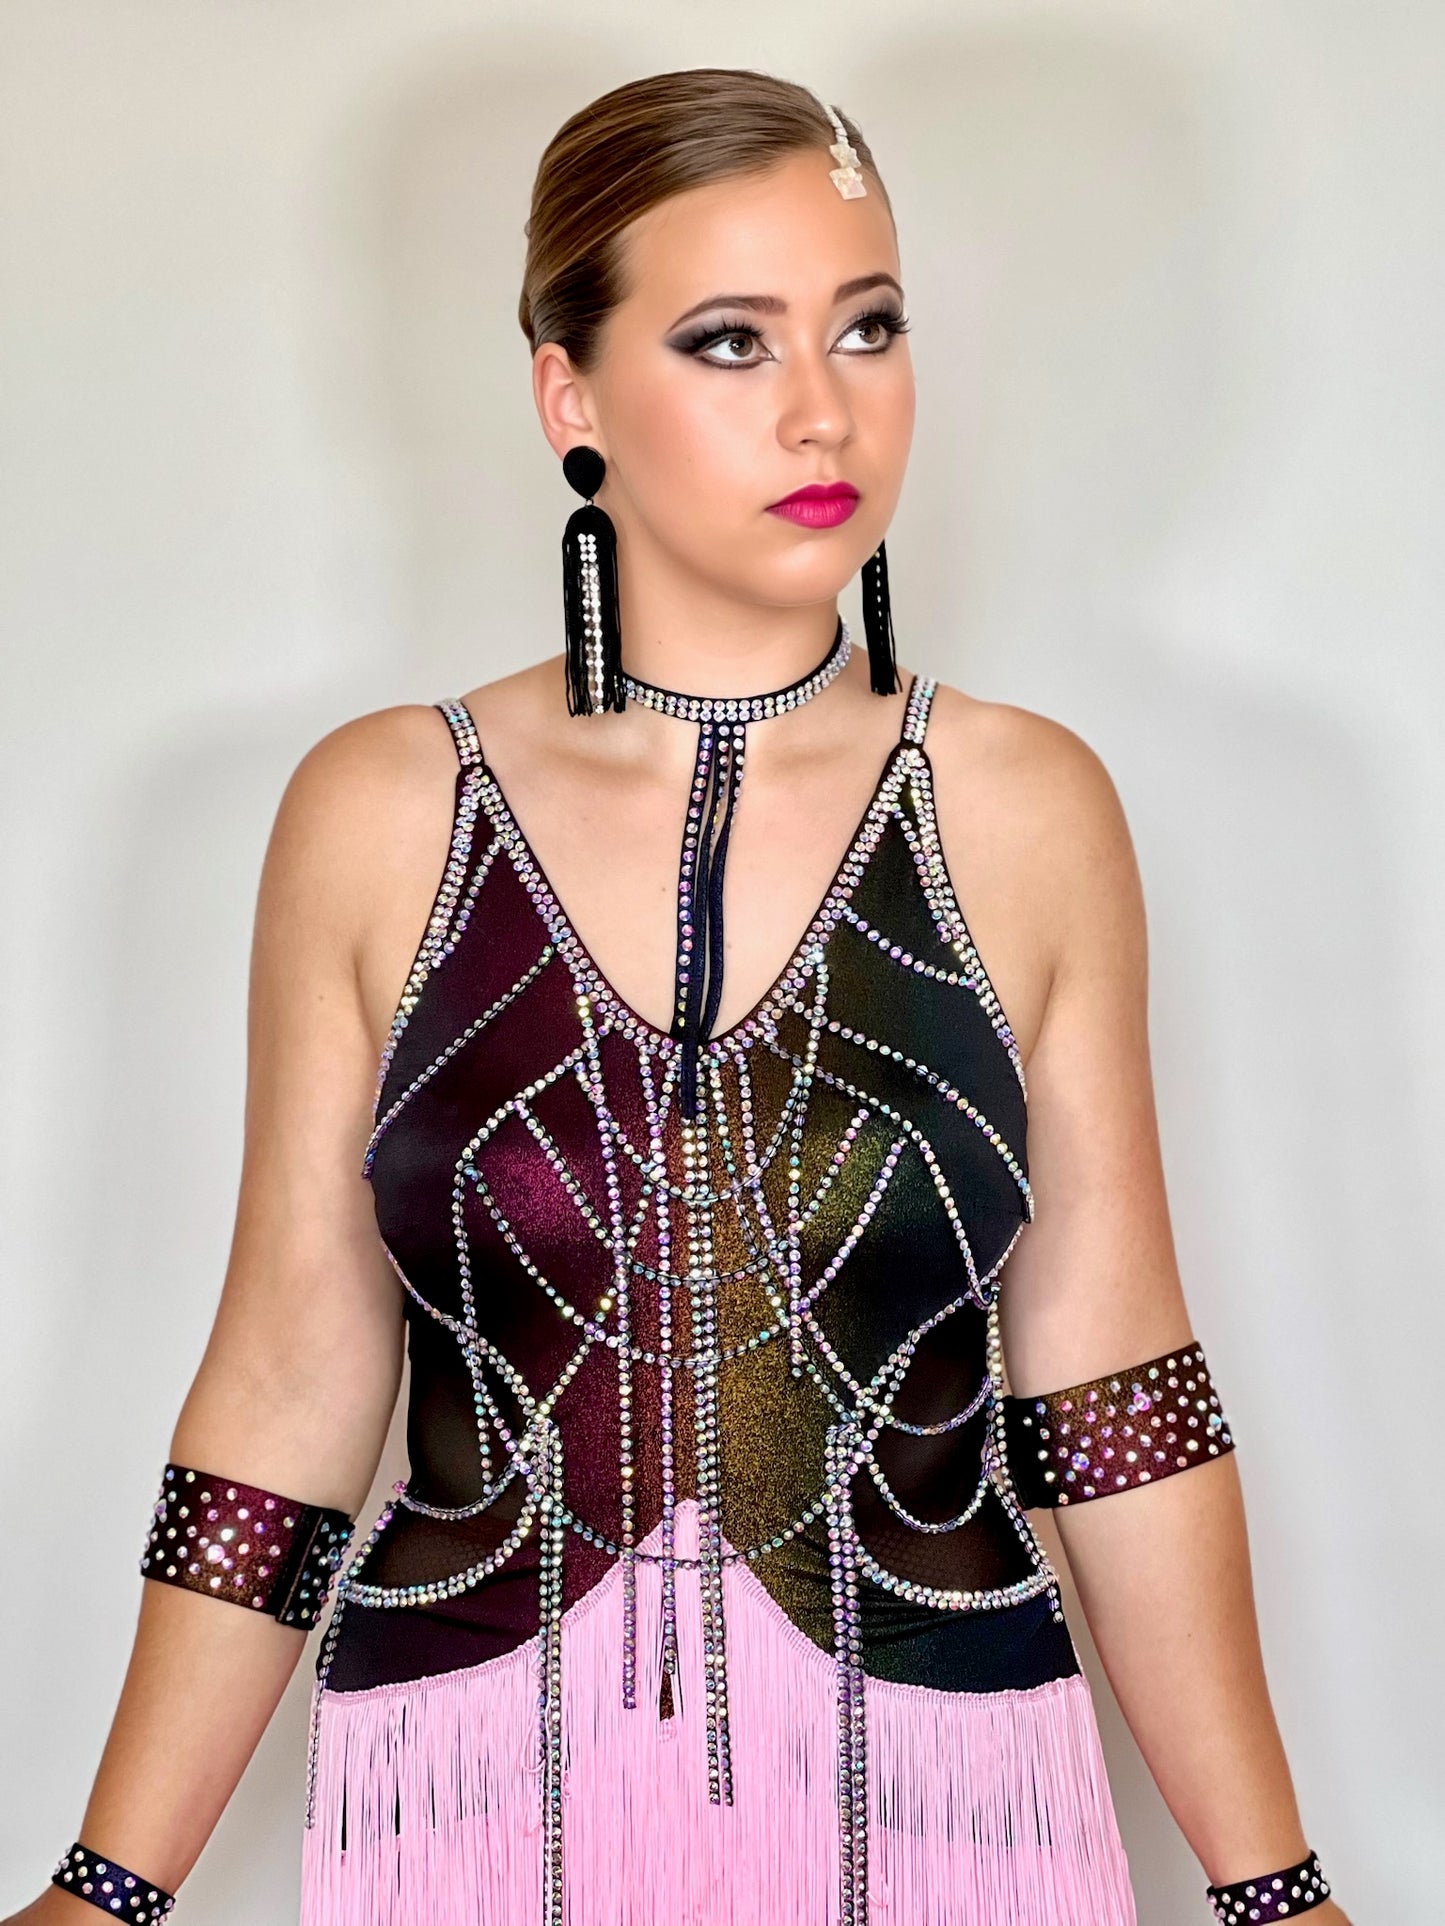 006 Multi Coloured metallic bodice with hanging material droppers. All stoned in AB with pale pink multi layered fringe skirt.